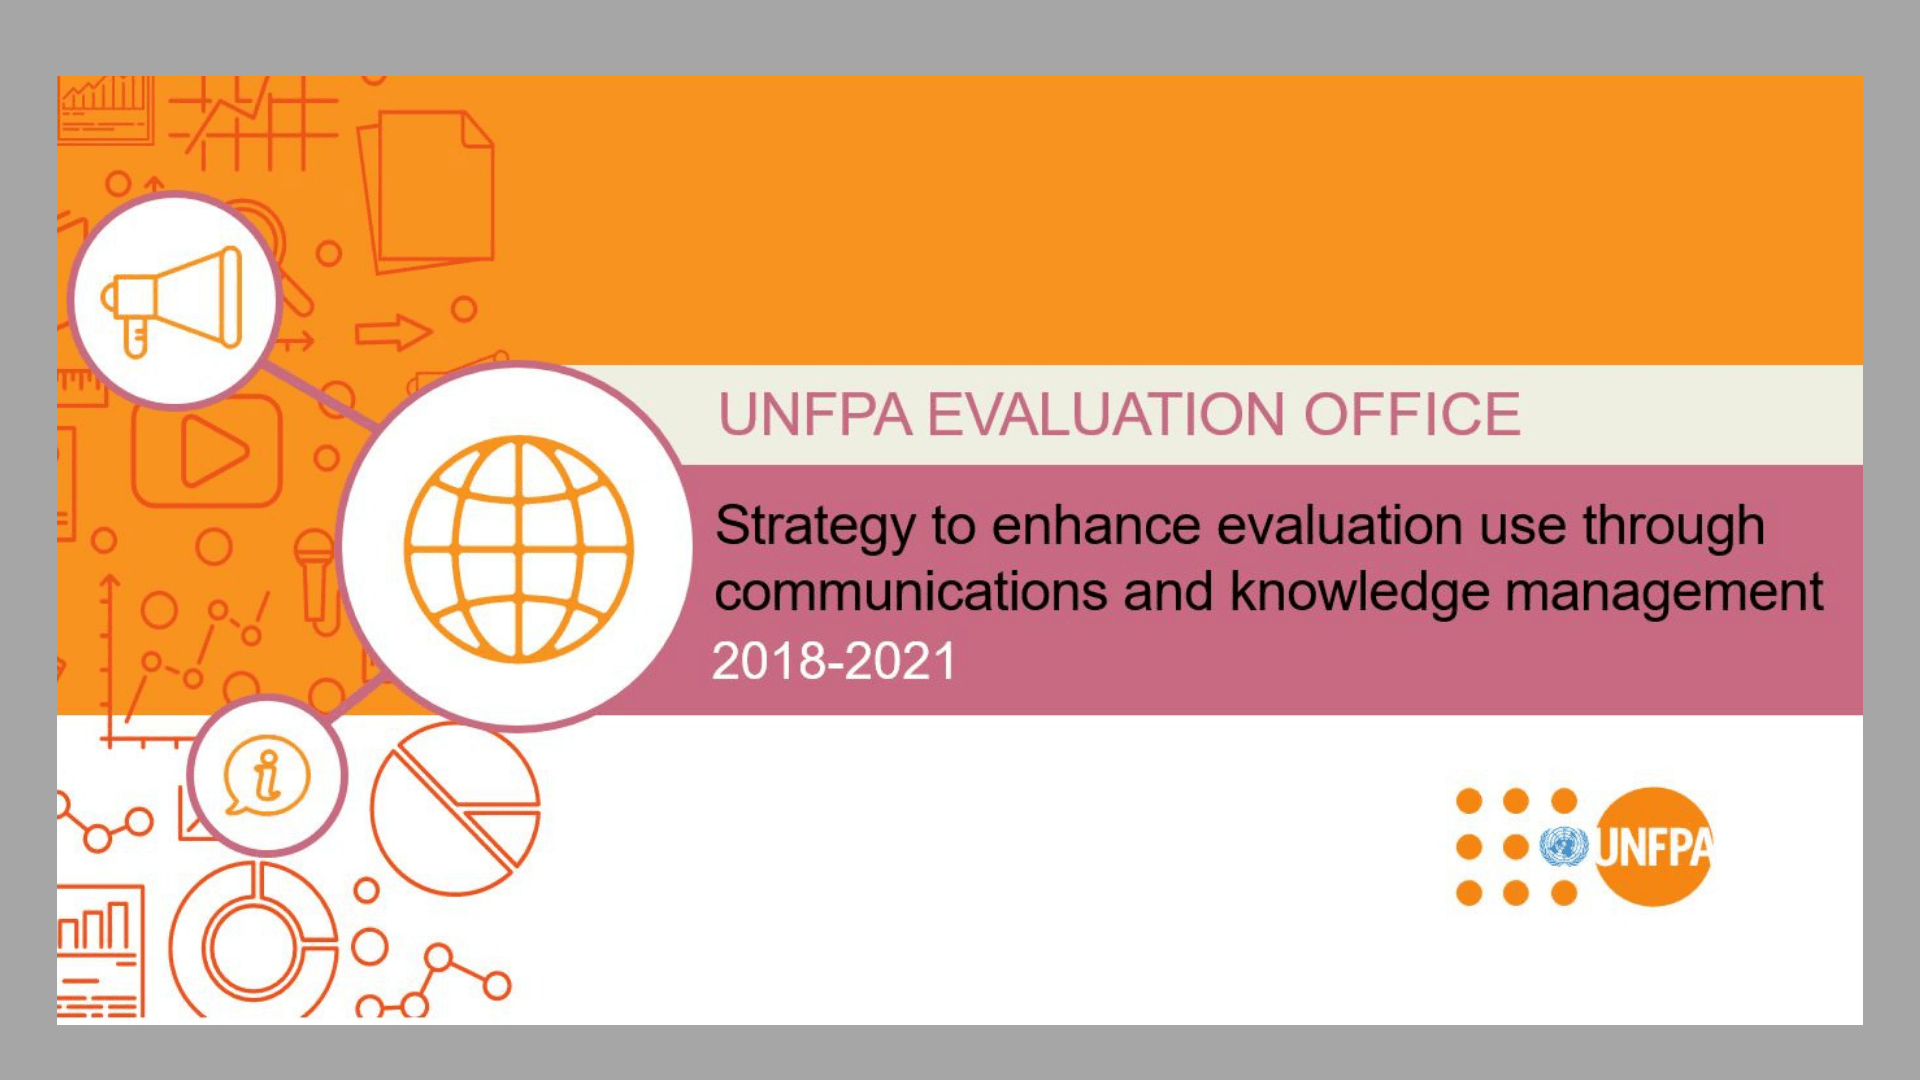 New! Strategy to enhance evaluation use through communications and knowledge management 2018-2021